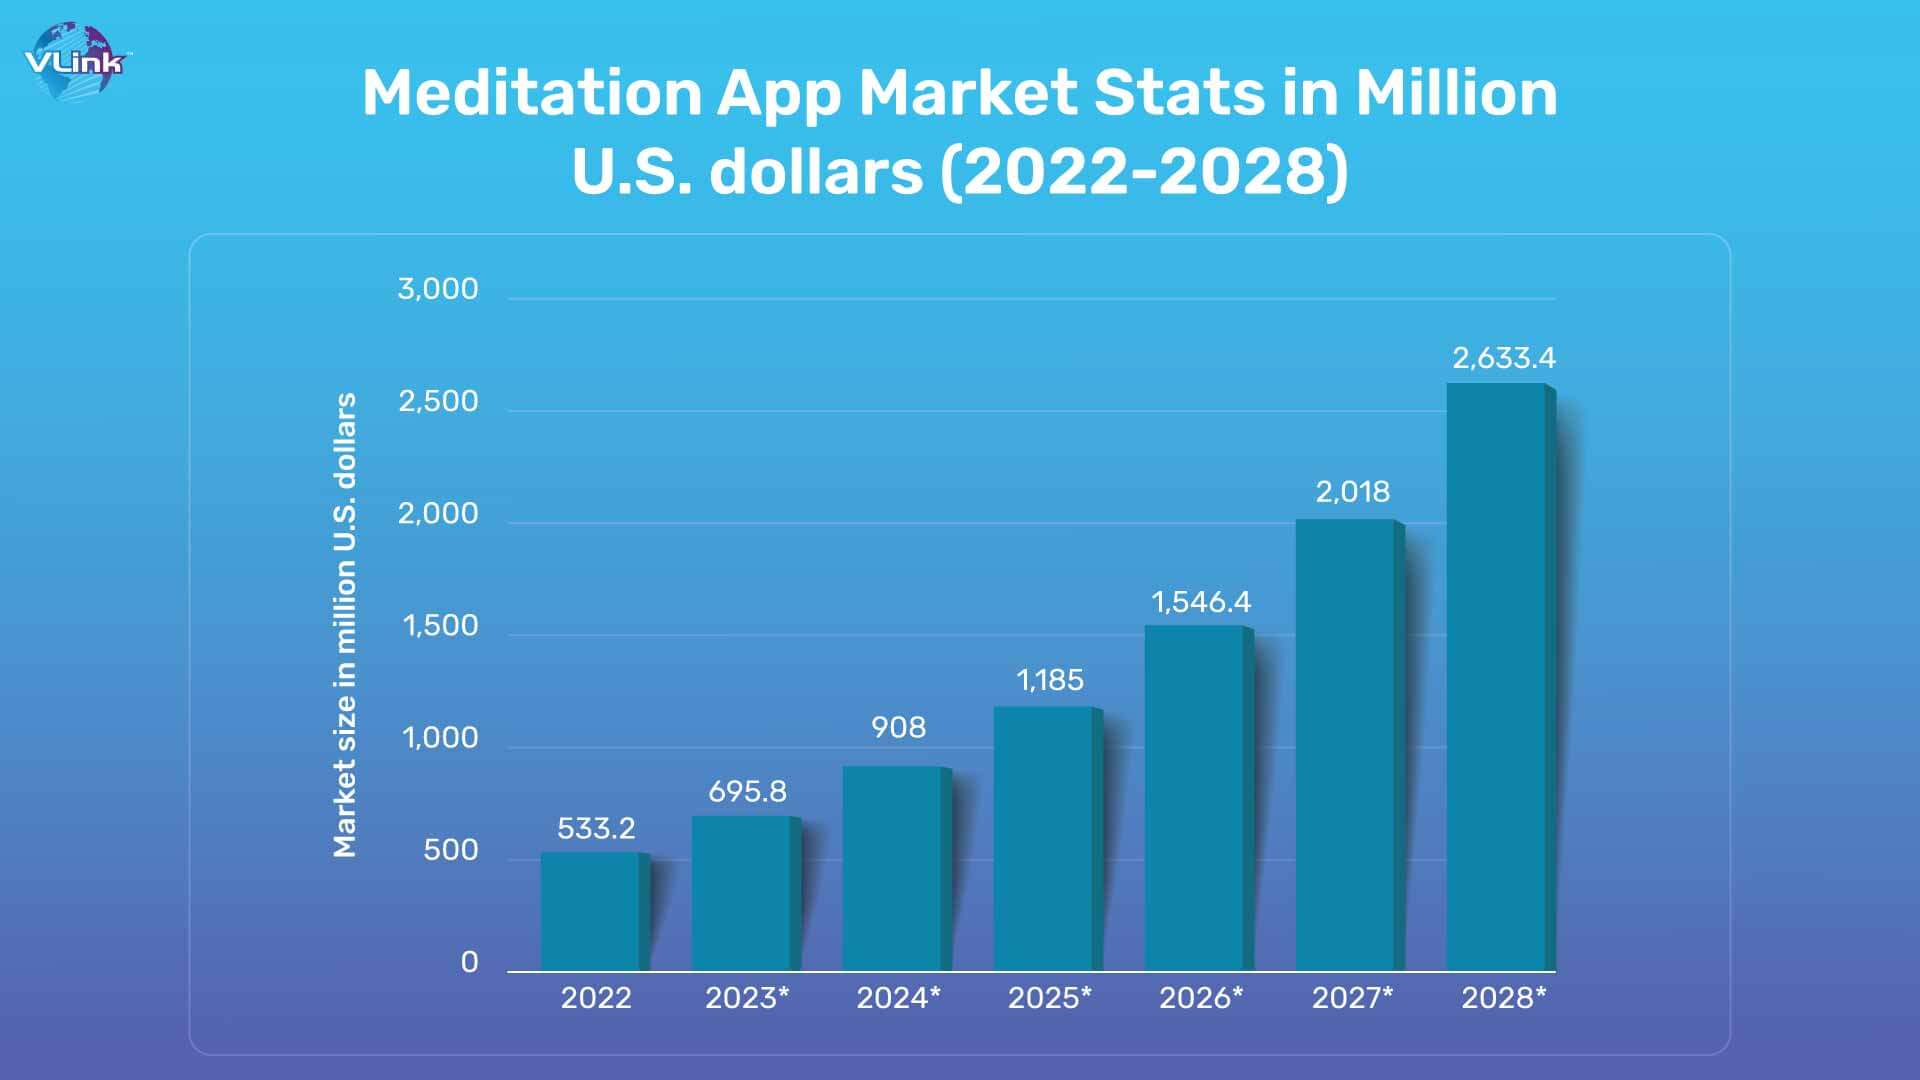 revenues from worldwide users of meditation apps are expected to exceed 2.6 billion U.S. dollars